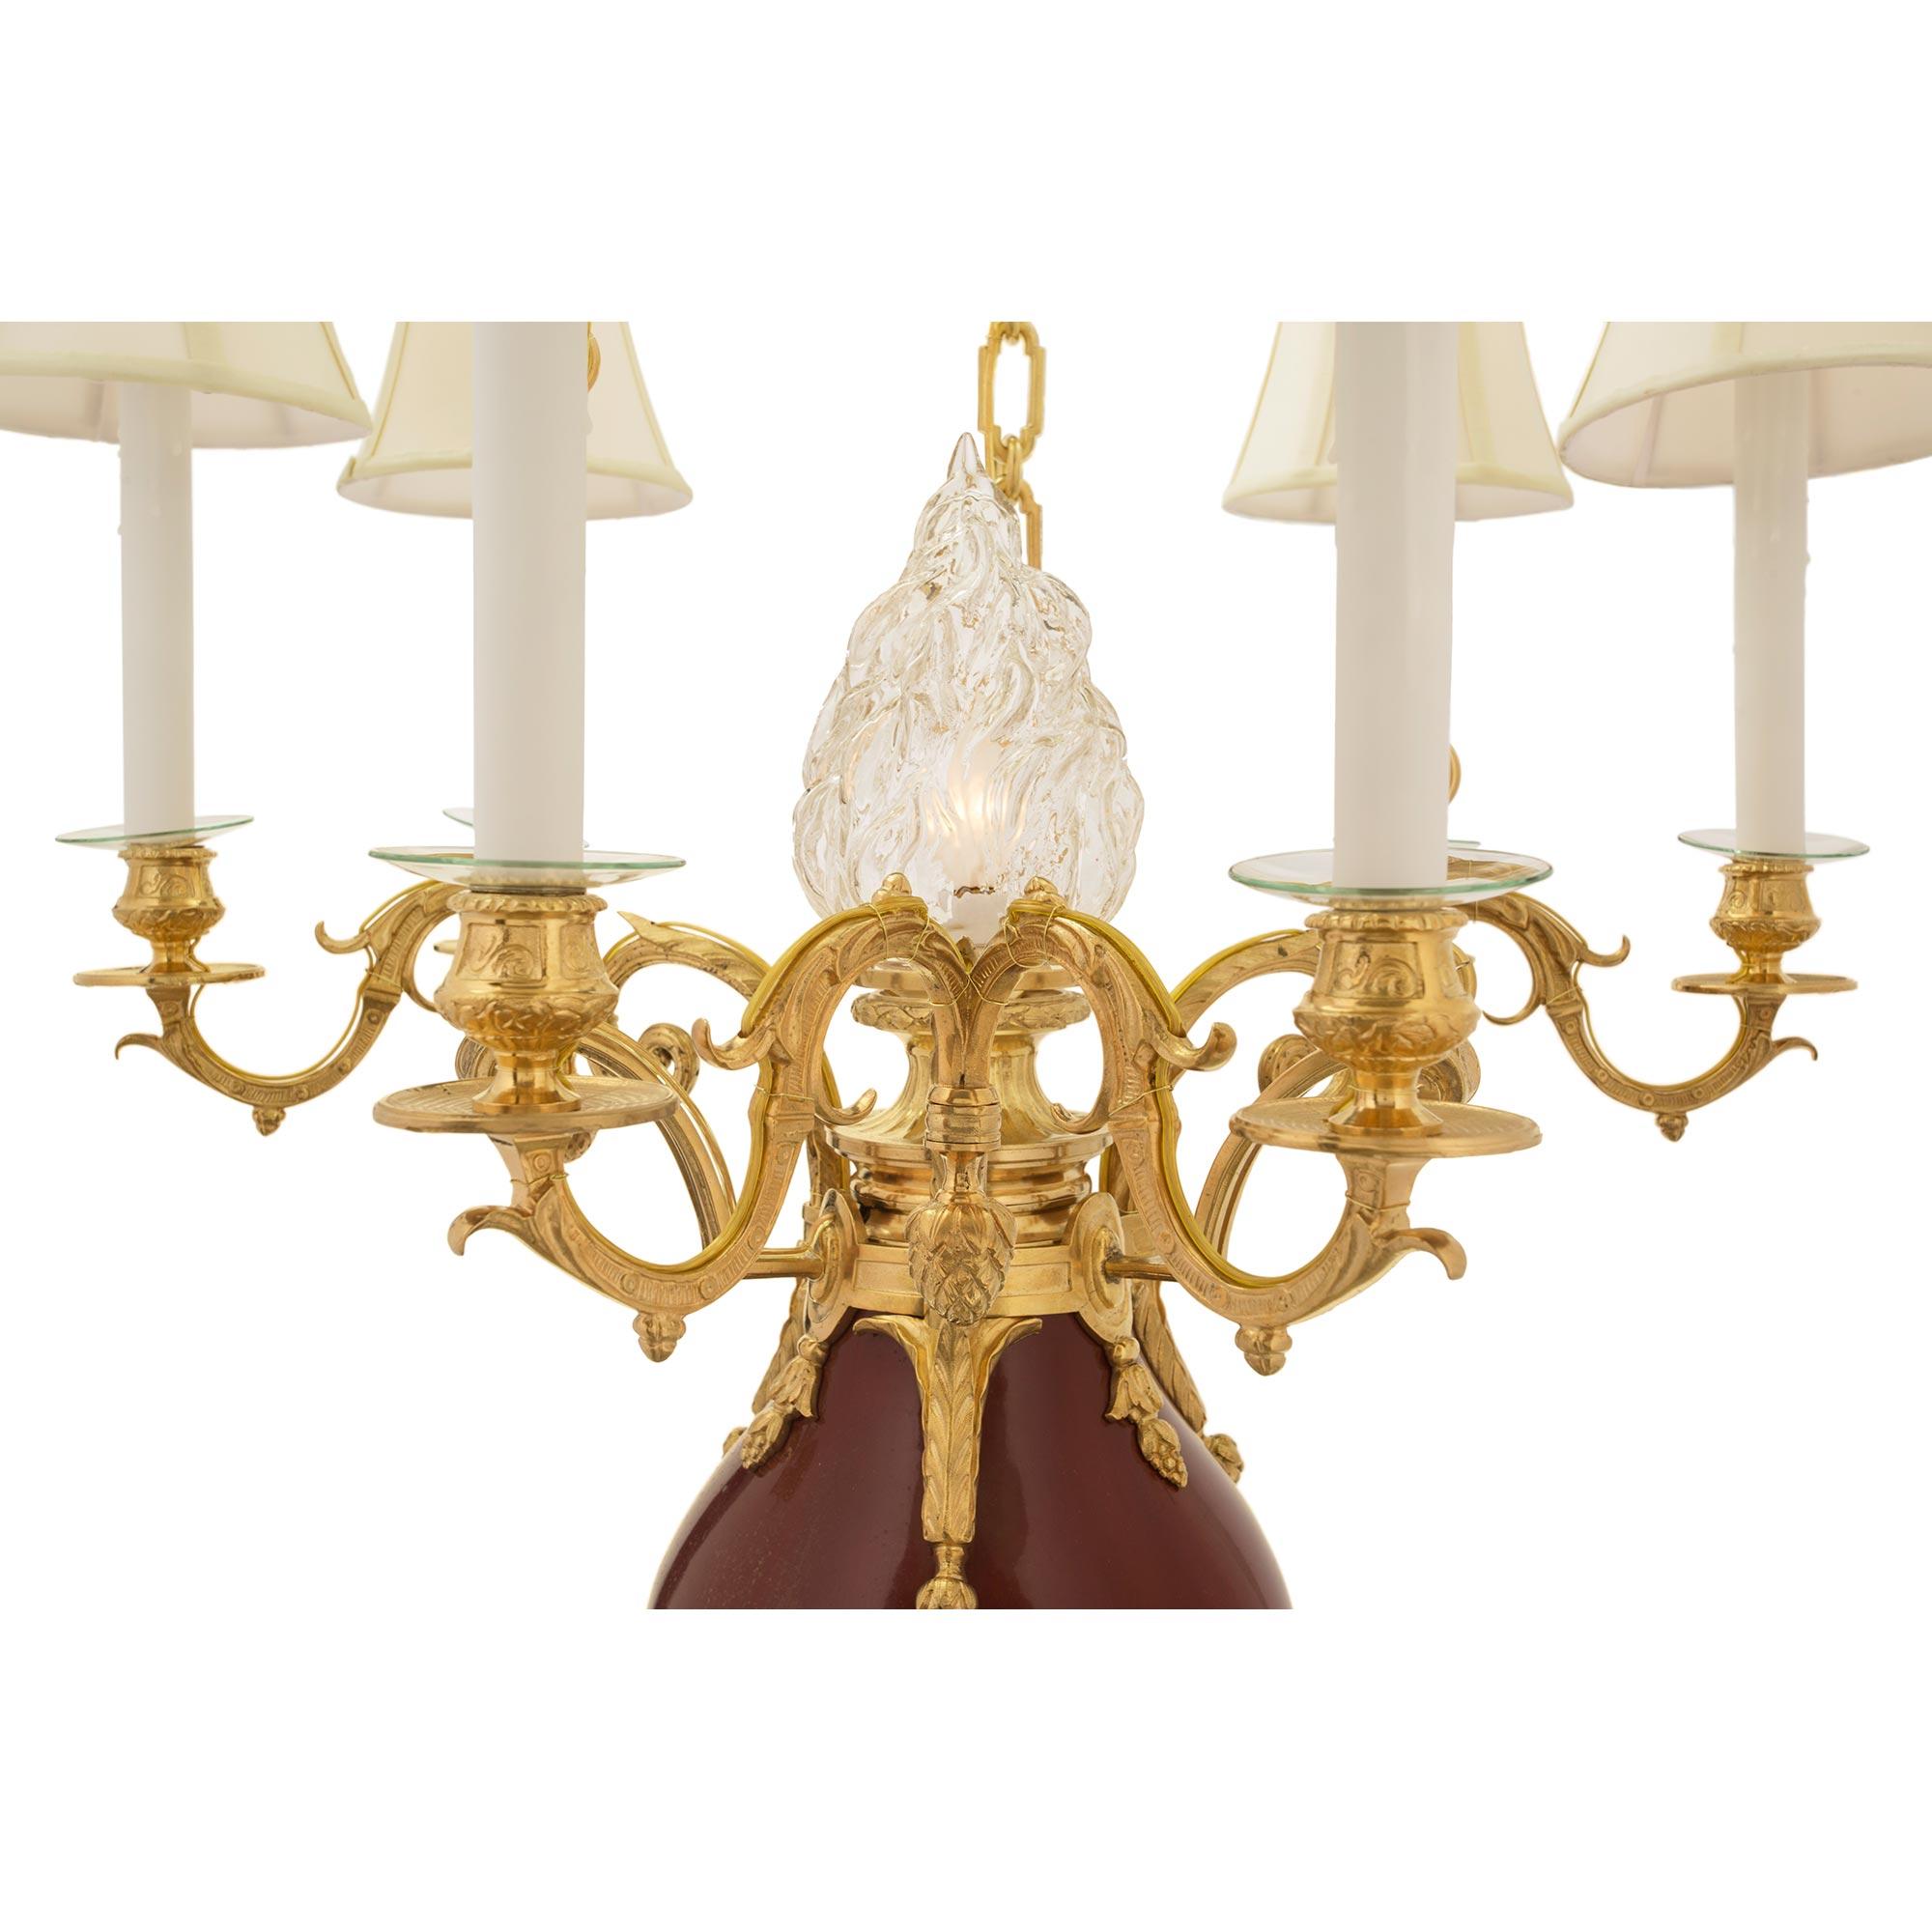 French 19th Century Louis XVI Style Porcelain and Ormolu Chandelier For Sale 1